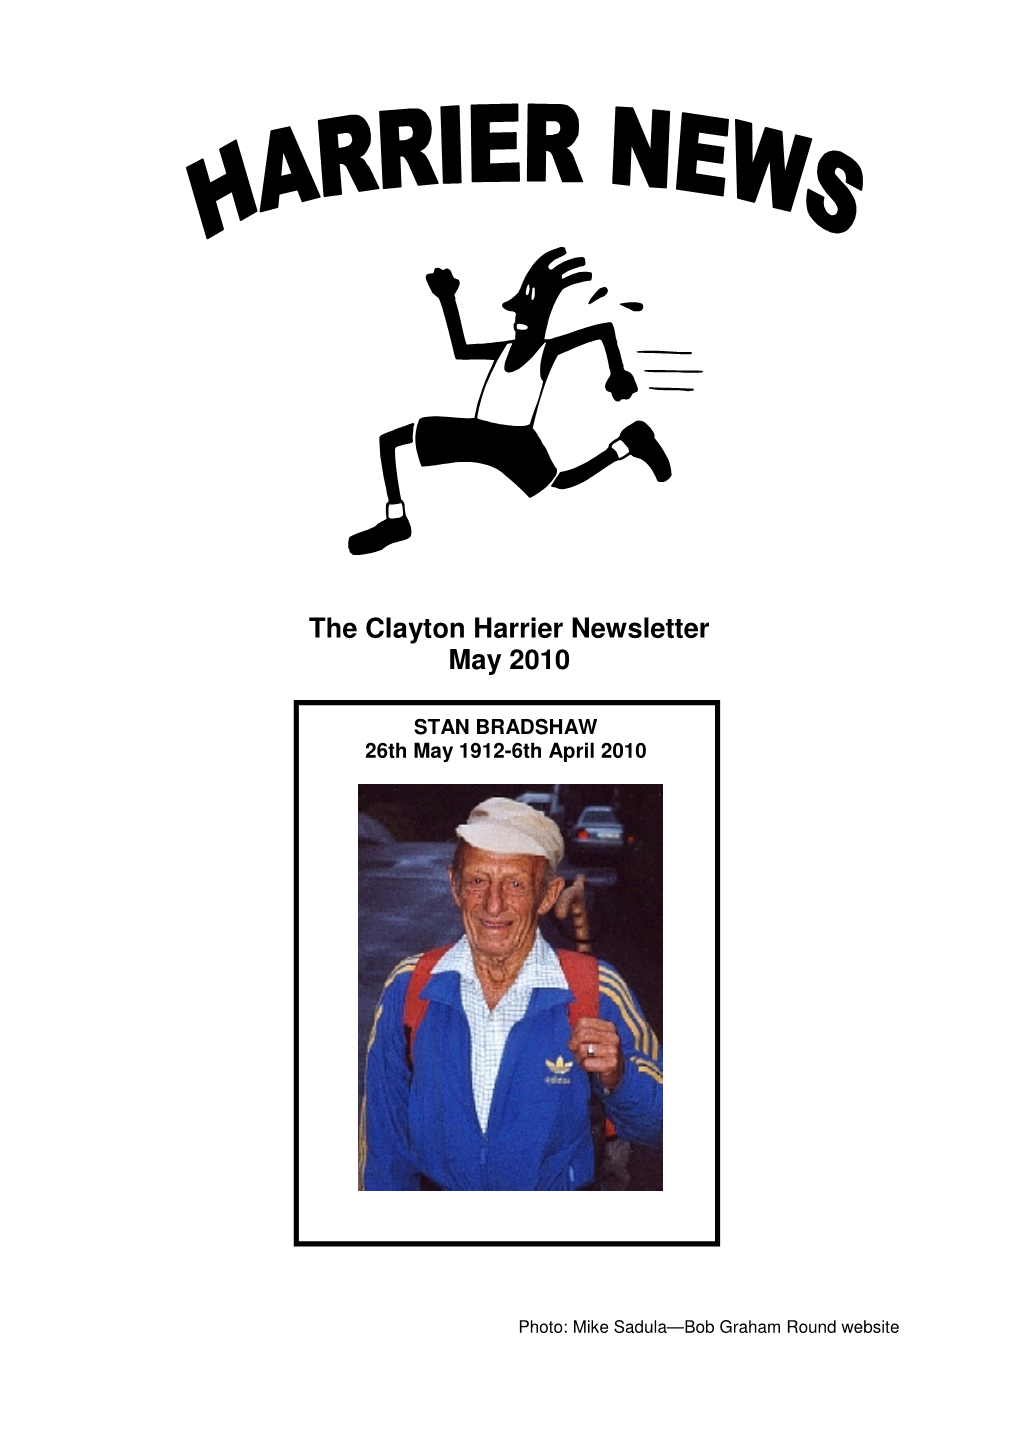 The Clayton Harrier Newsletter May 2010